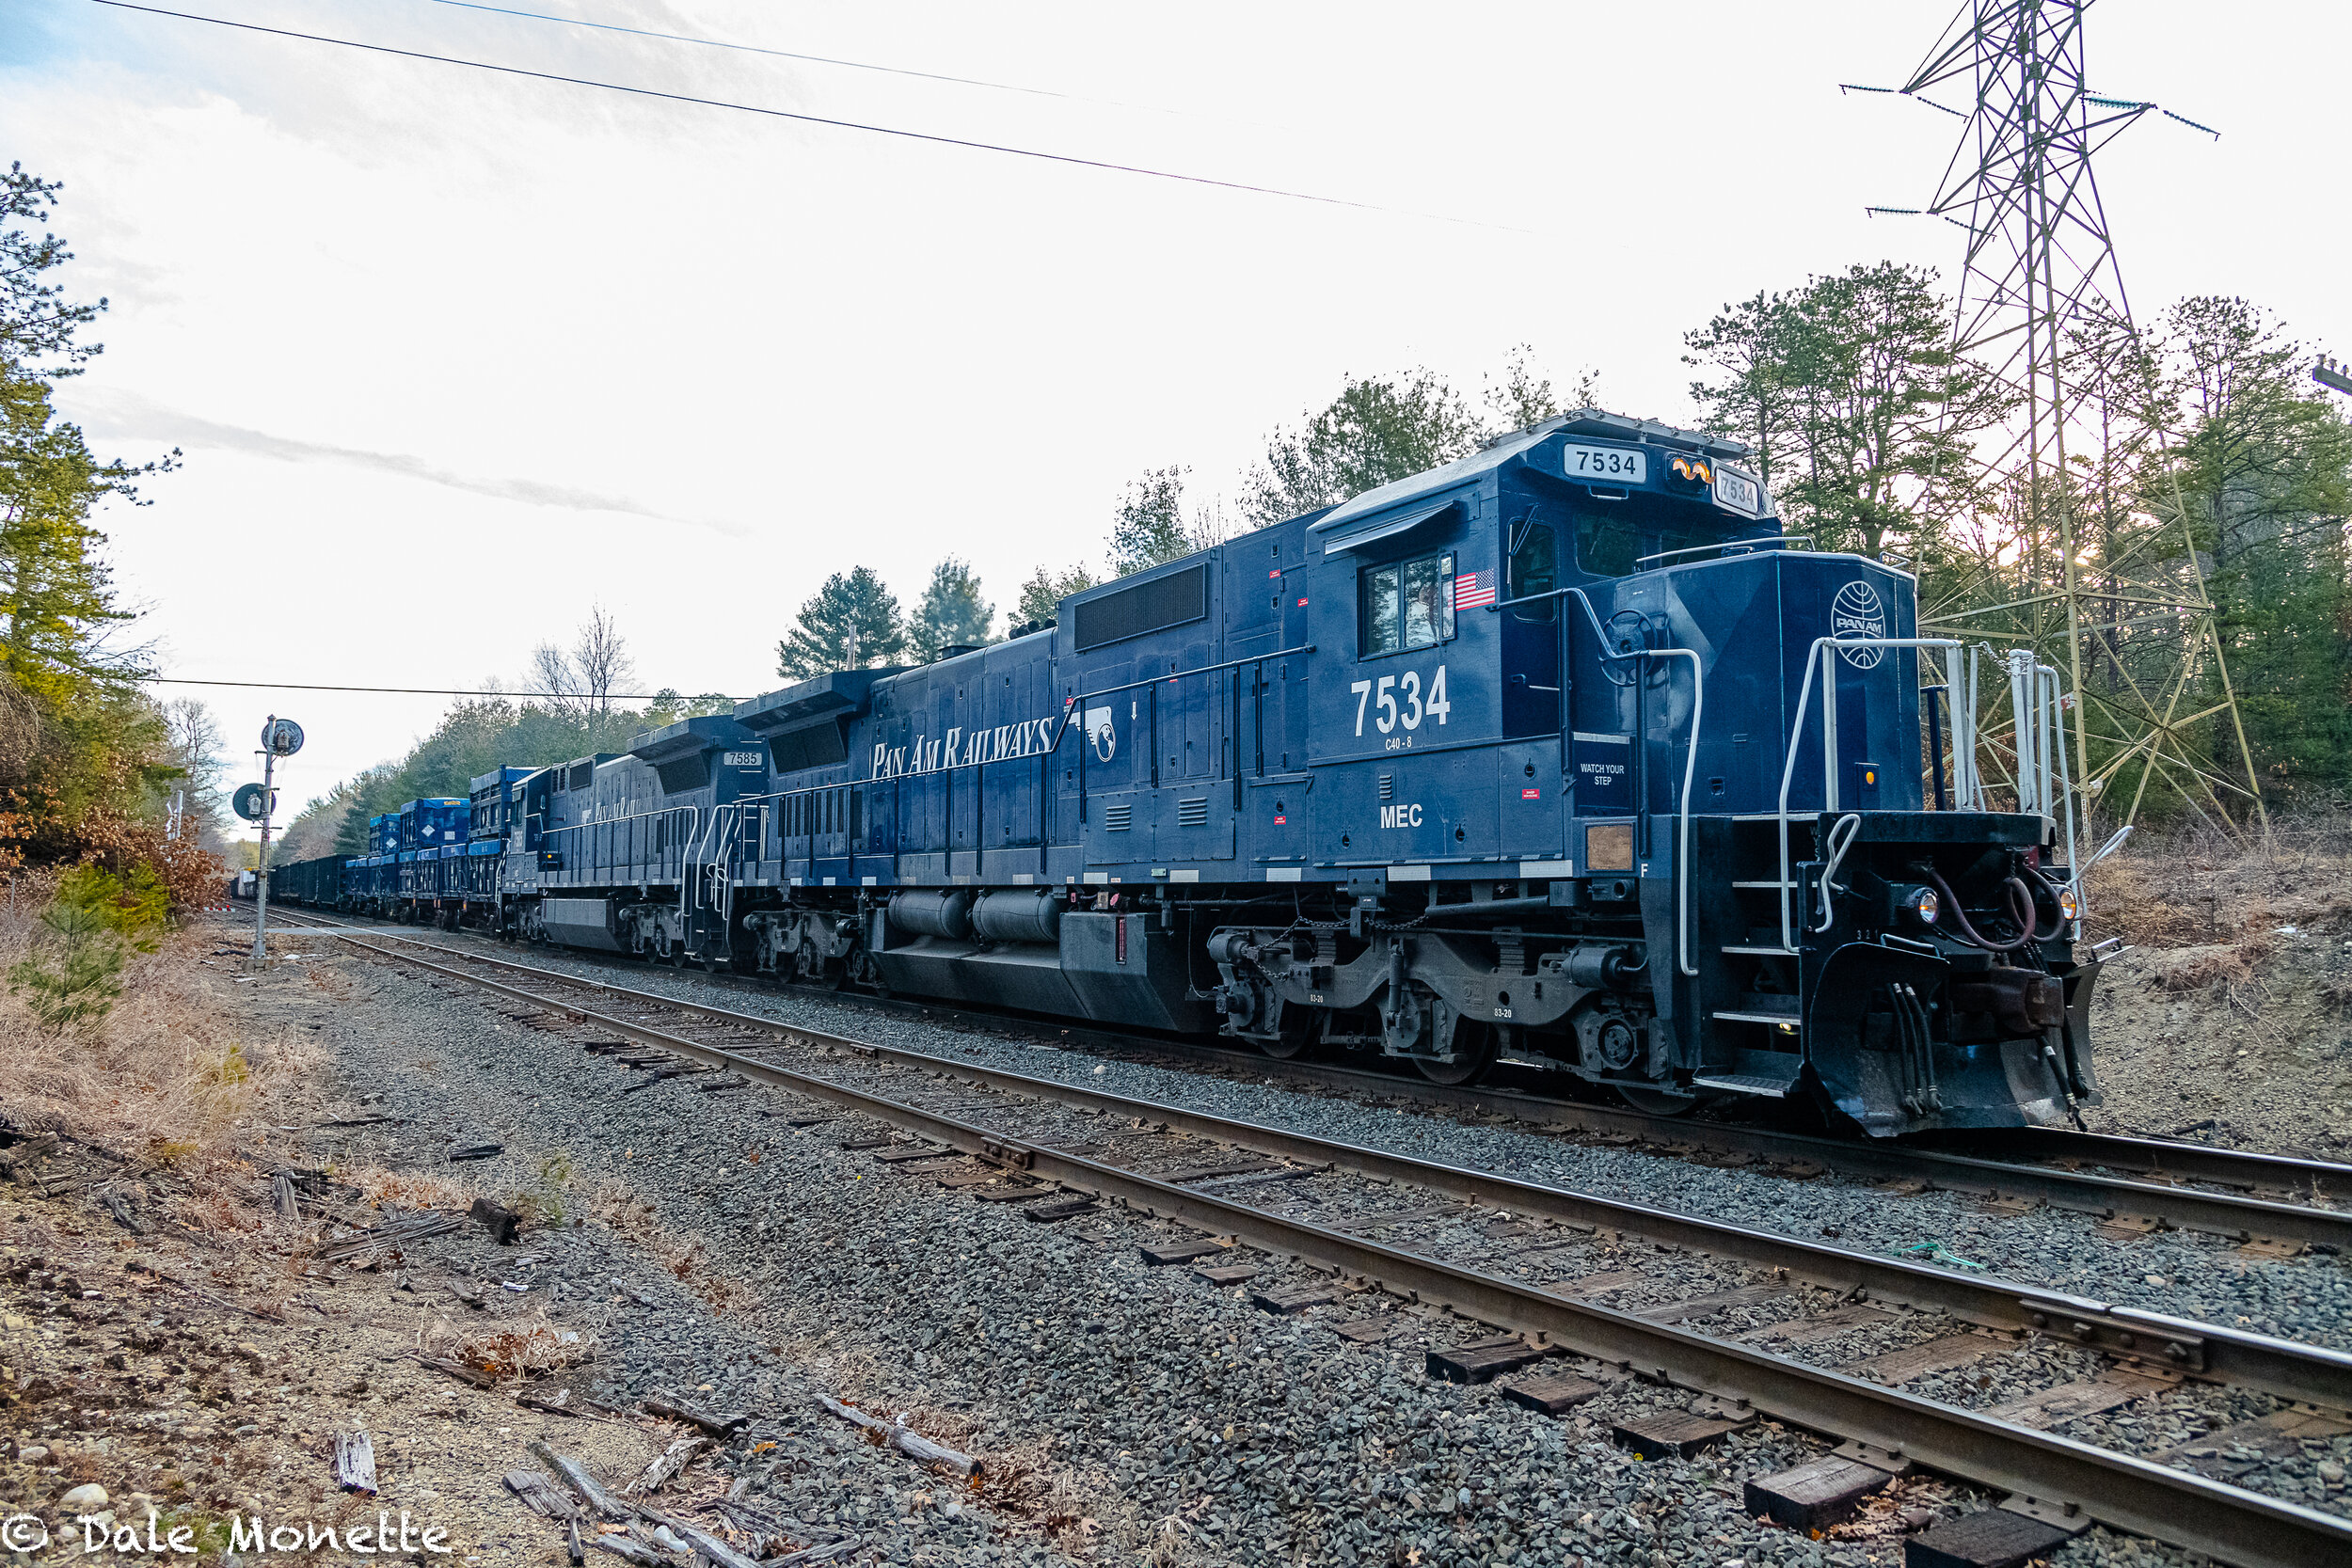   Here’s a Pan Am freight train passing thru Lake Pleasant on its way to the East Deerfield freight yard from Portland Maine’s Rigby Yard.  There is also one that goes the reverse direction.    